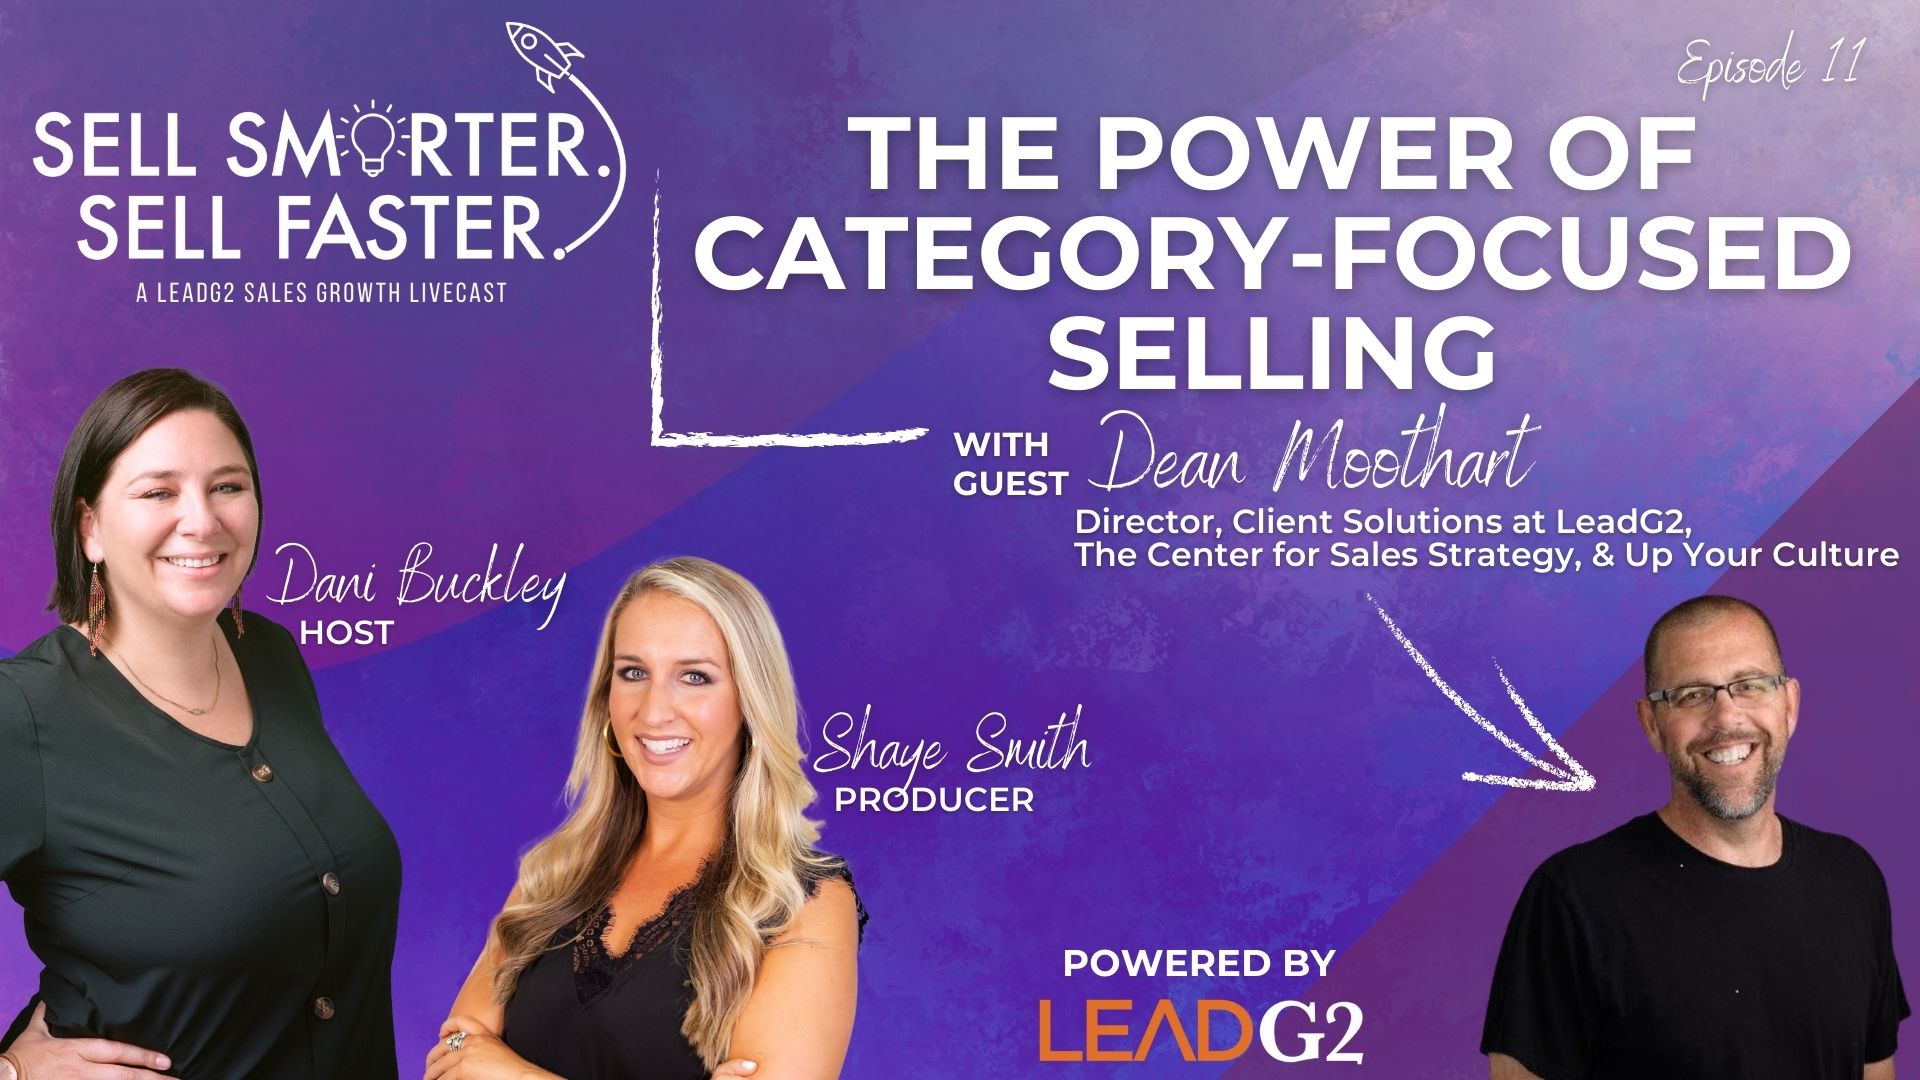 The Power of Category-Focused Selling | Sell Smarter. Sell Faster. 